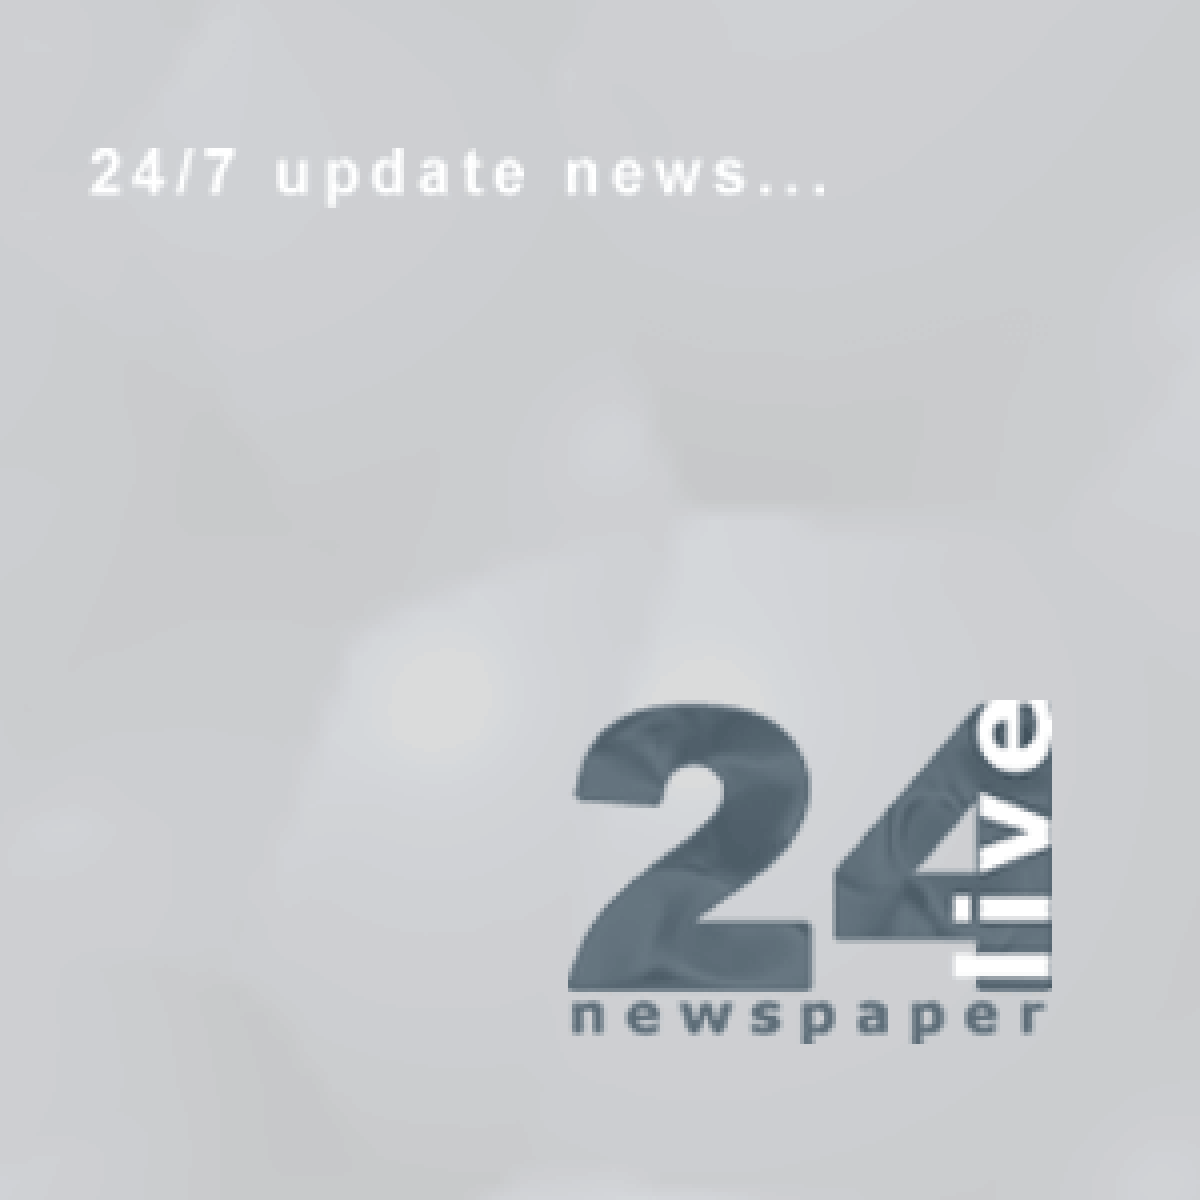 Increase Your News In 7 Days